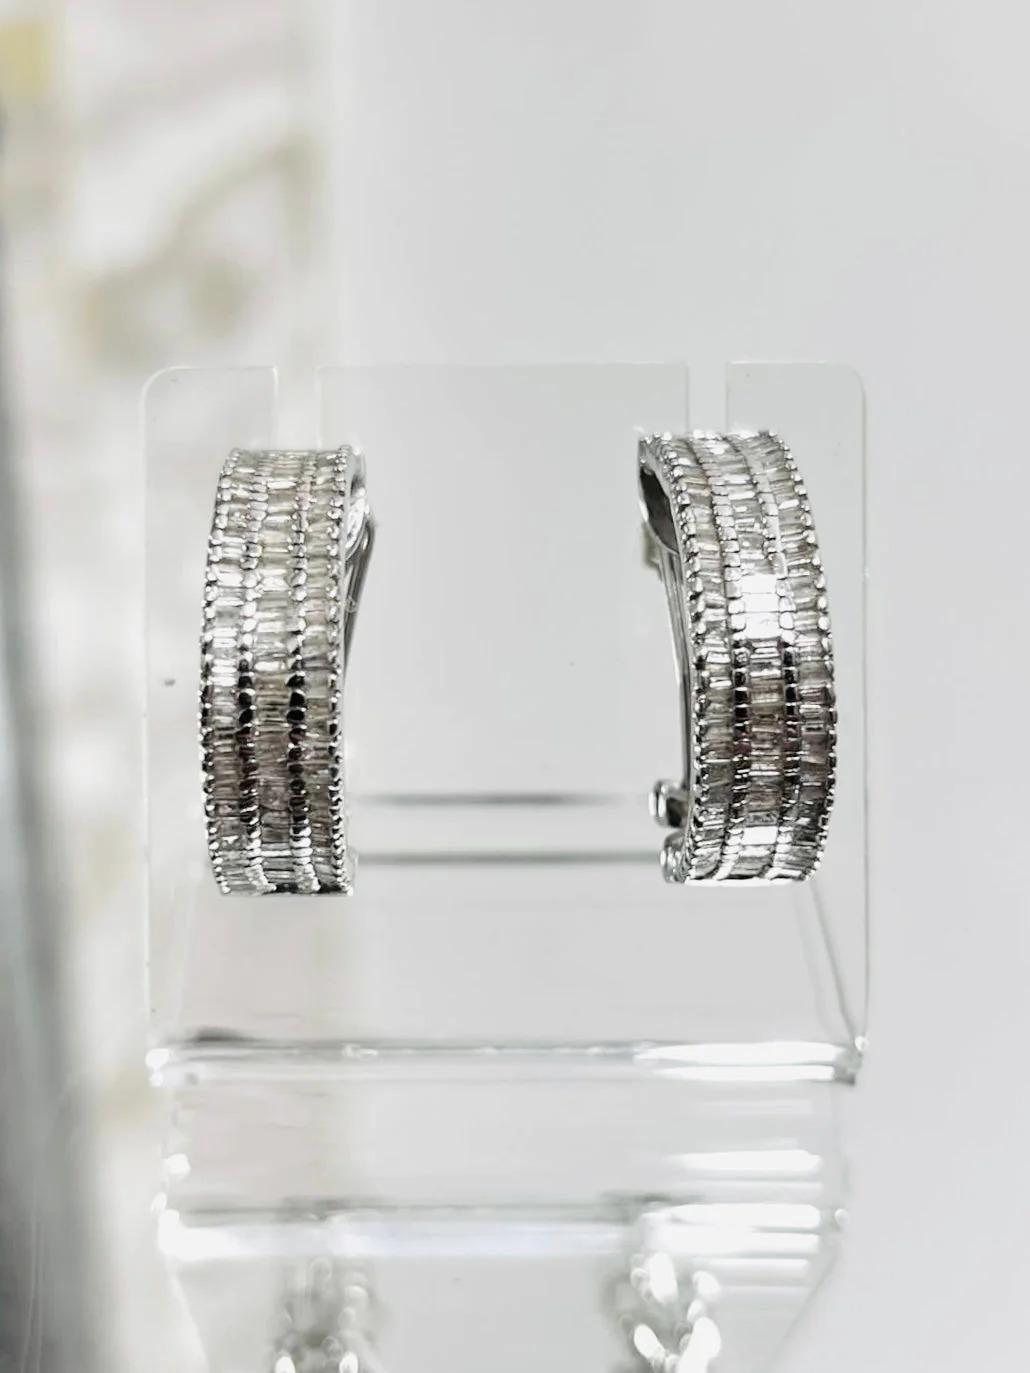 Diamond Baguette & 18k White Gold Earrings

Vintage earrings with triple rows of diamonds in huggie style. Approx 2cts of brilliant white diamonds. For pieced ears with clip over back and butterflies closure.

Additional information:
Size – One